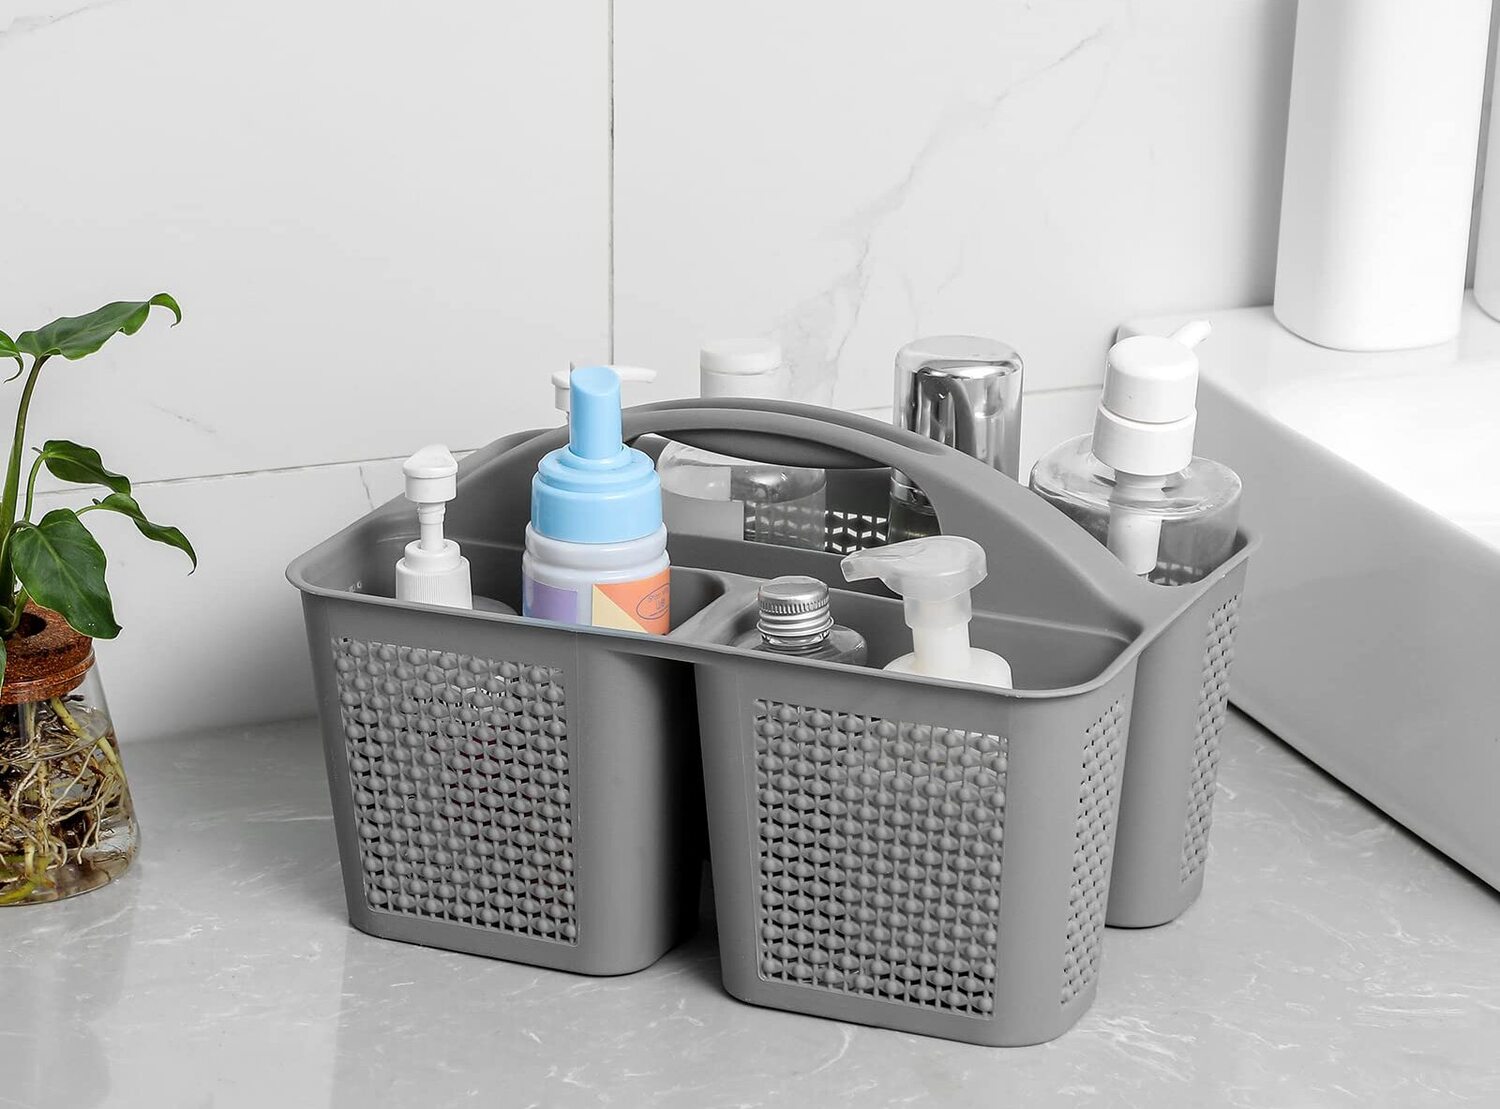 How To Clean A Plastic Shower Caddy